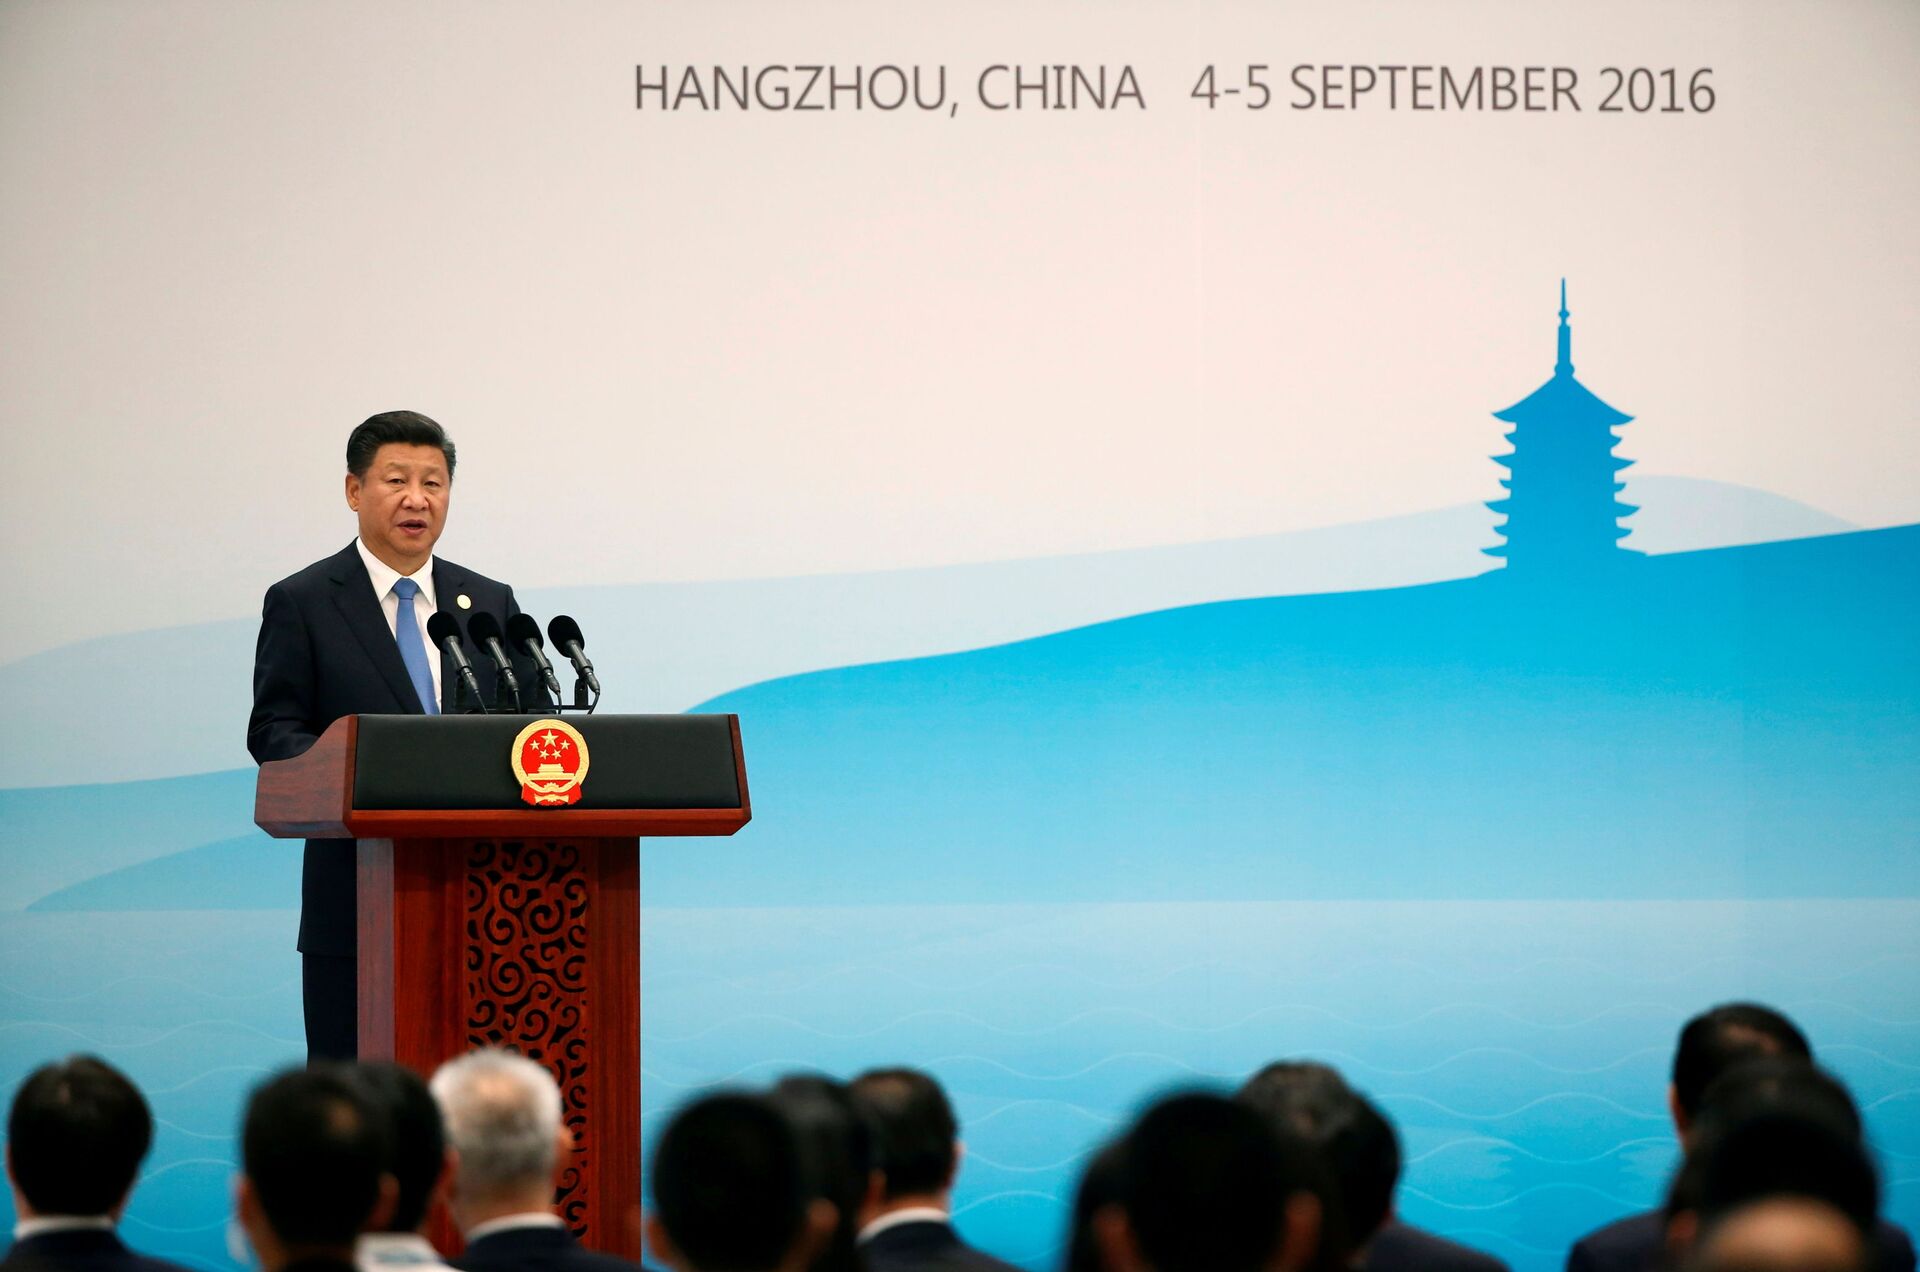 China's President Xi Jinping speaks at a news conference after the closing of G20 Summit in Hangzhou, Zhejiang Province, China, September 5, 2016. REUTERS/Damir Sagolj/File Photo - Sputnik International, 1920, 23.09.2021